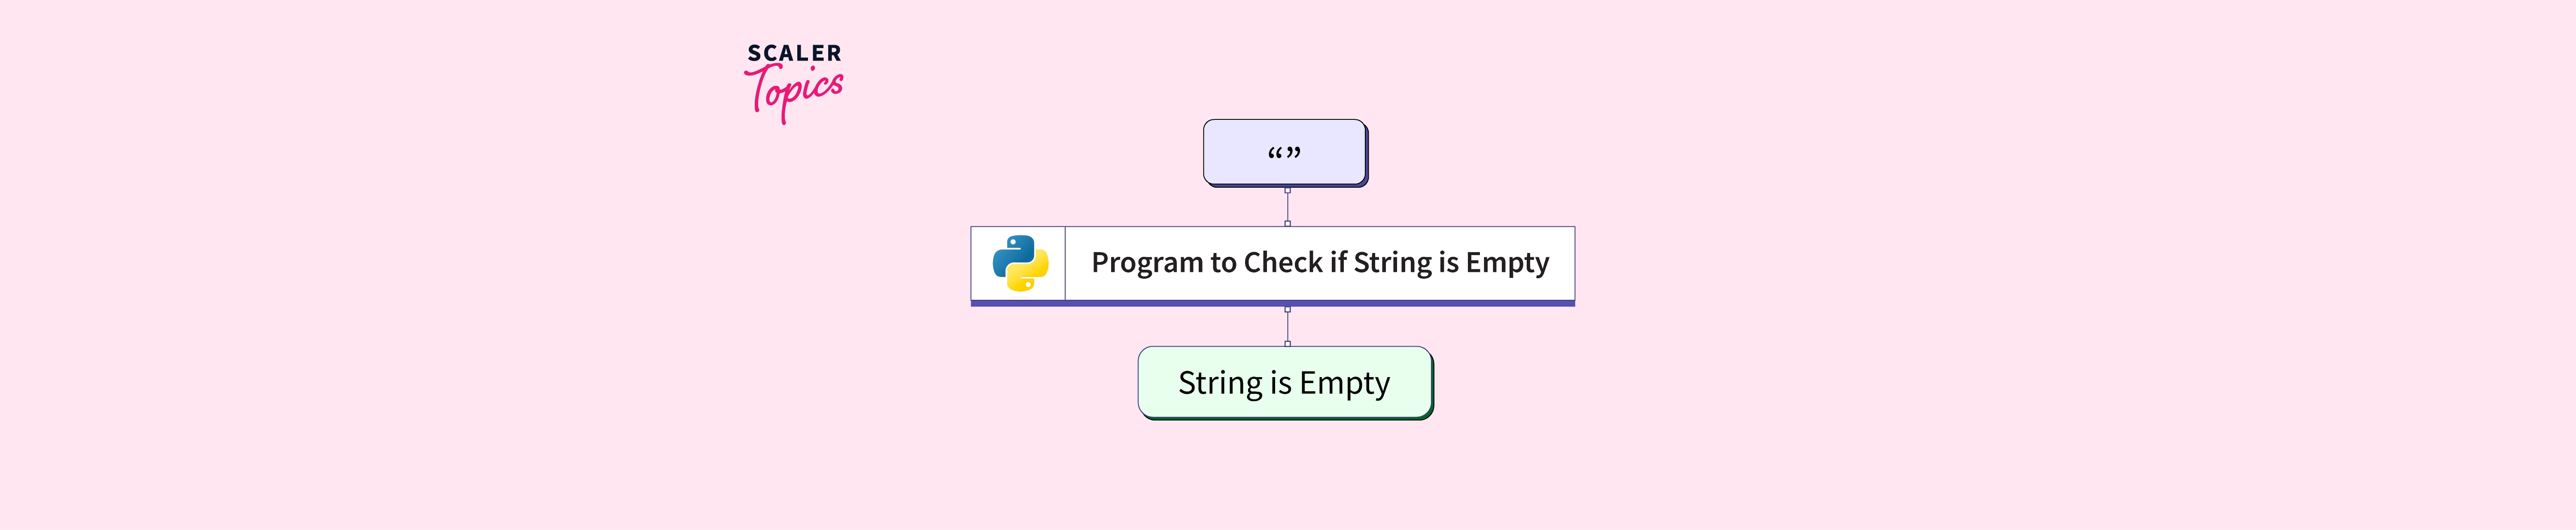 Program To Check If String Is Empty In Python - Scaler Topics